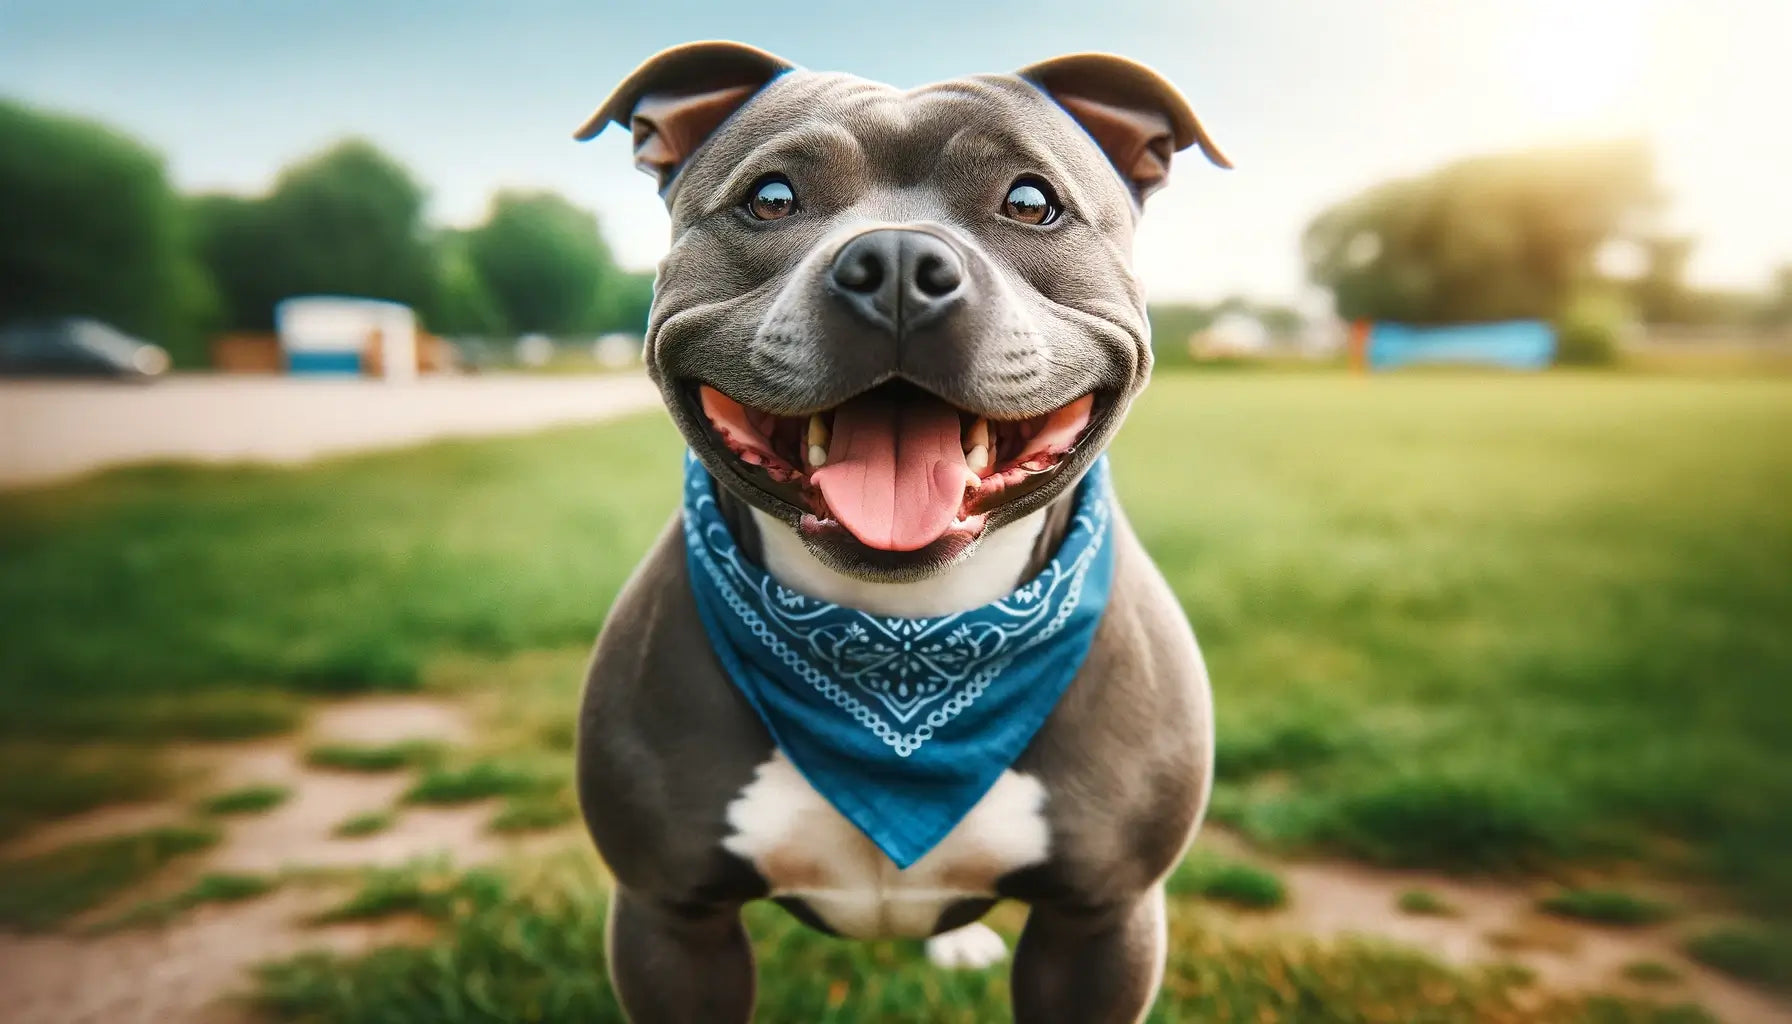 Blue Staffy stands on a grassy field looking directly at the camera with a big open-mouthed smile.